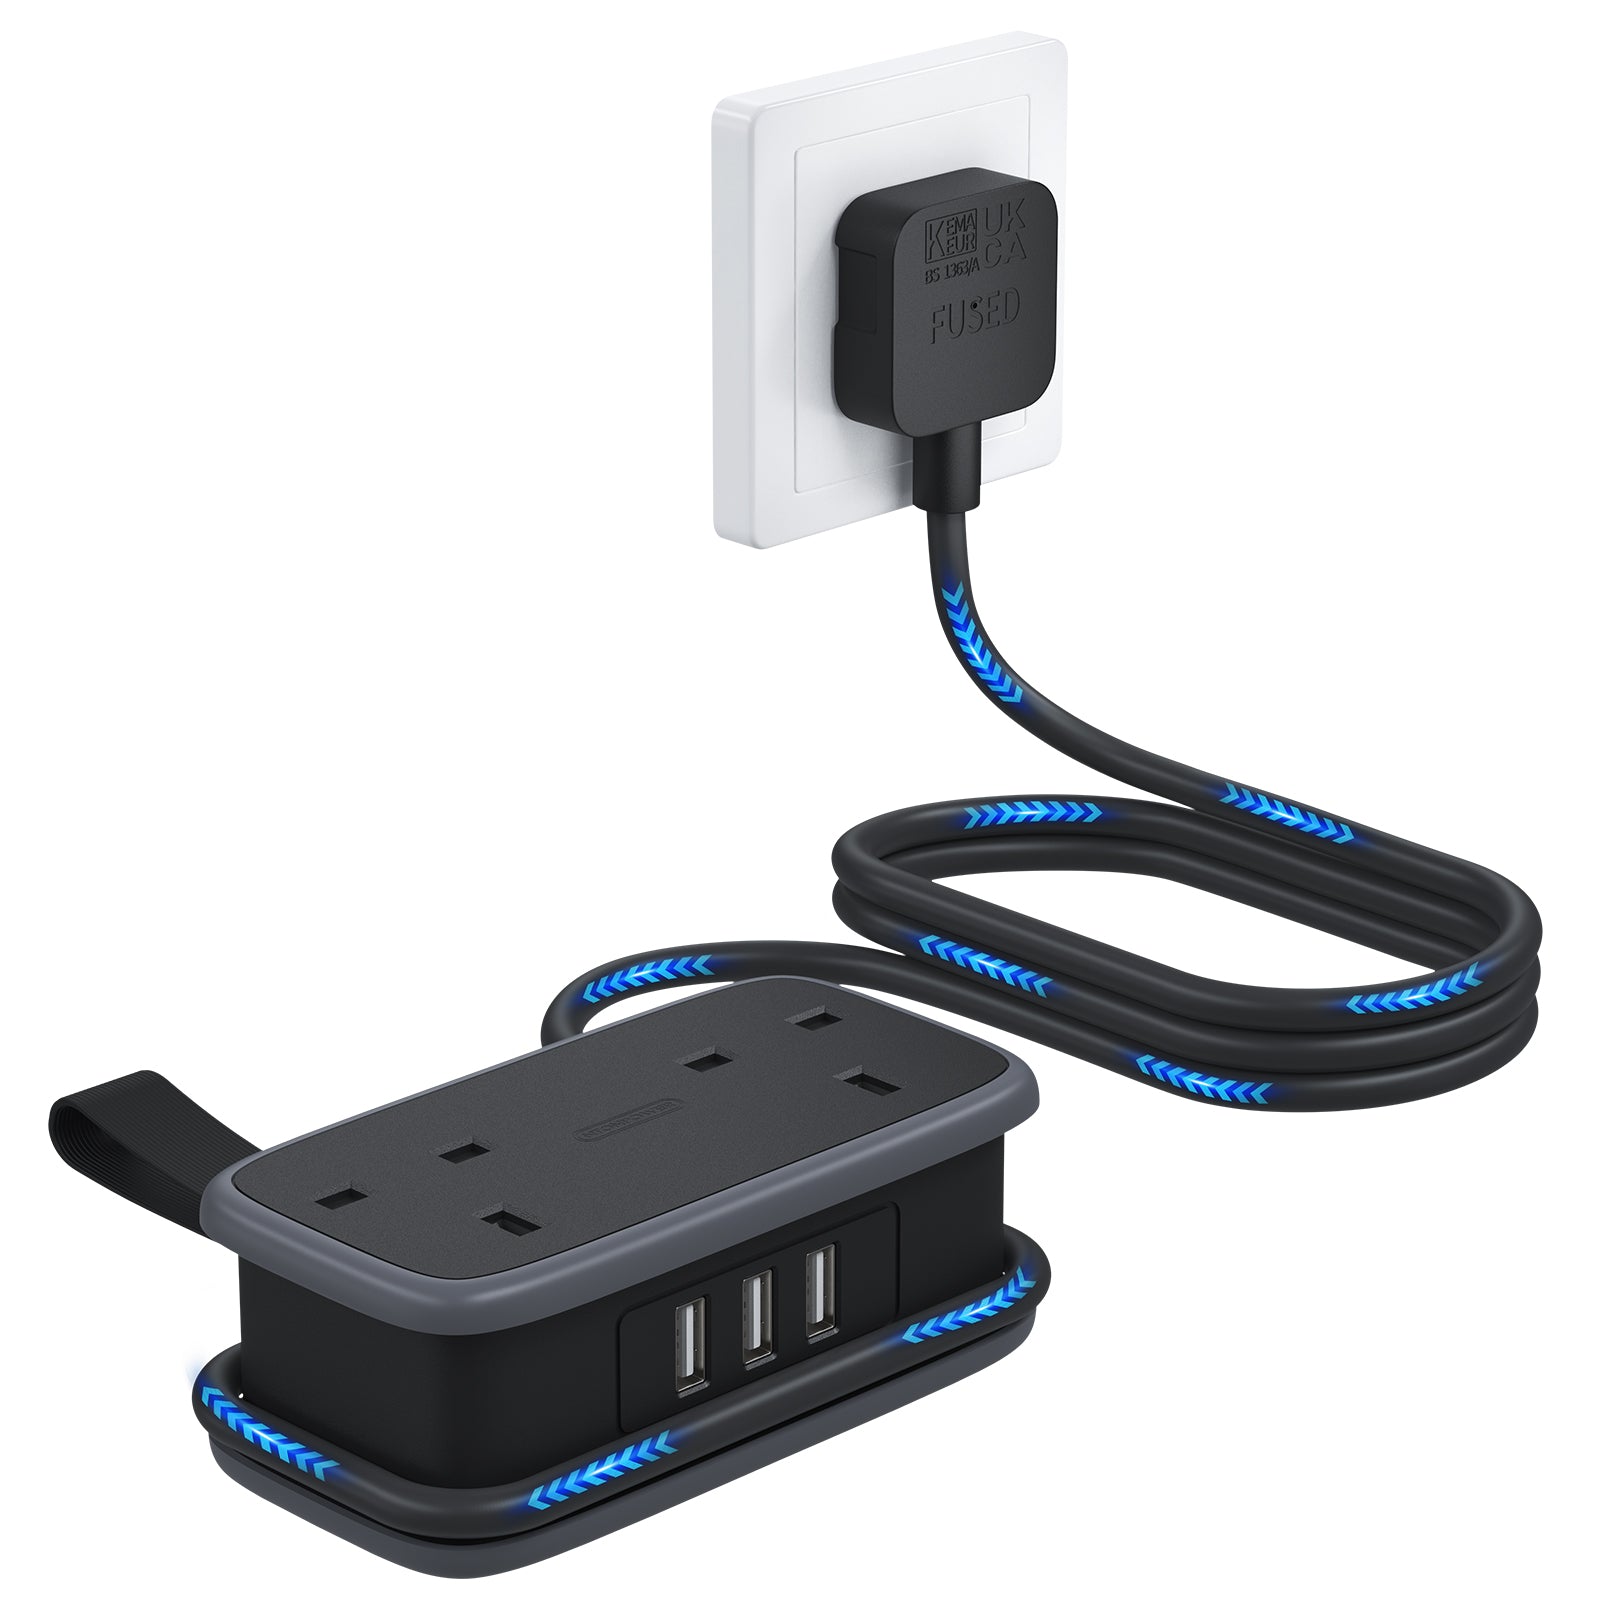 Ntonpower UK Pocket Power Strip 2 Outlets 3 USB Ports for Travel